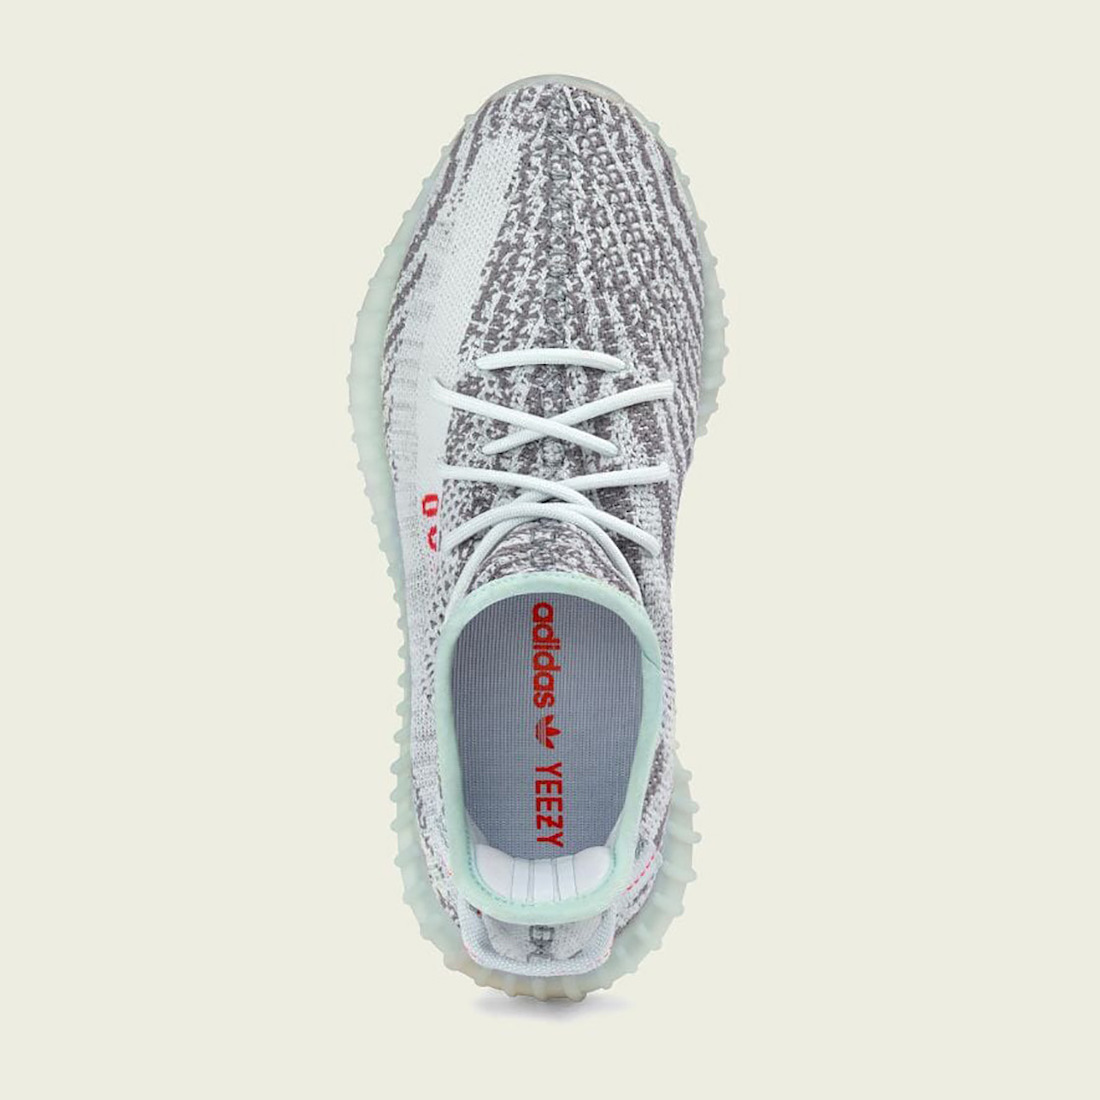 adidas Yeezy Boost 350 V2 Blue Tint Restock 2021 Release Date